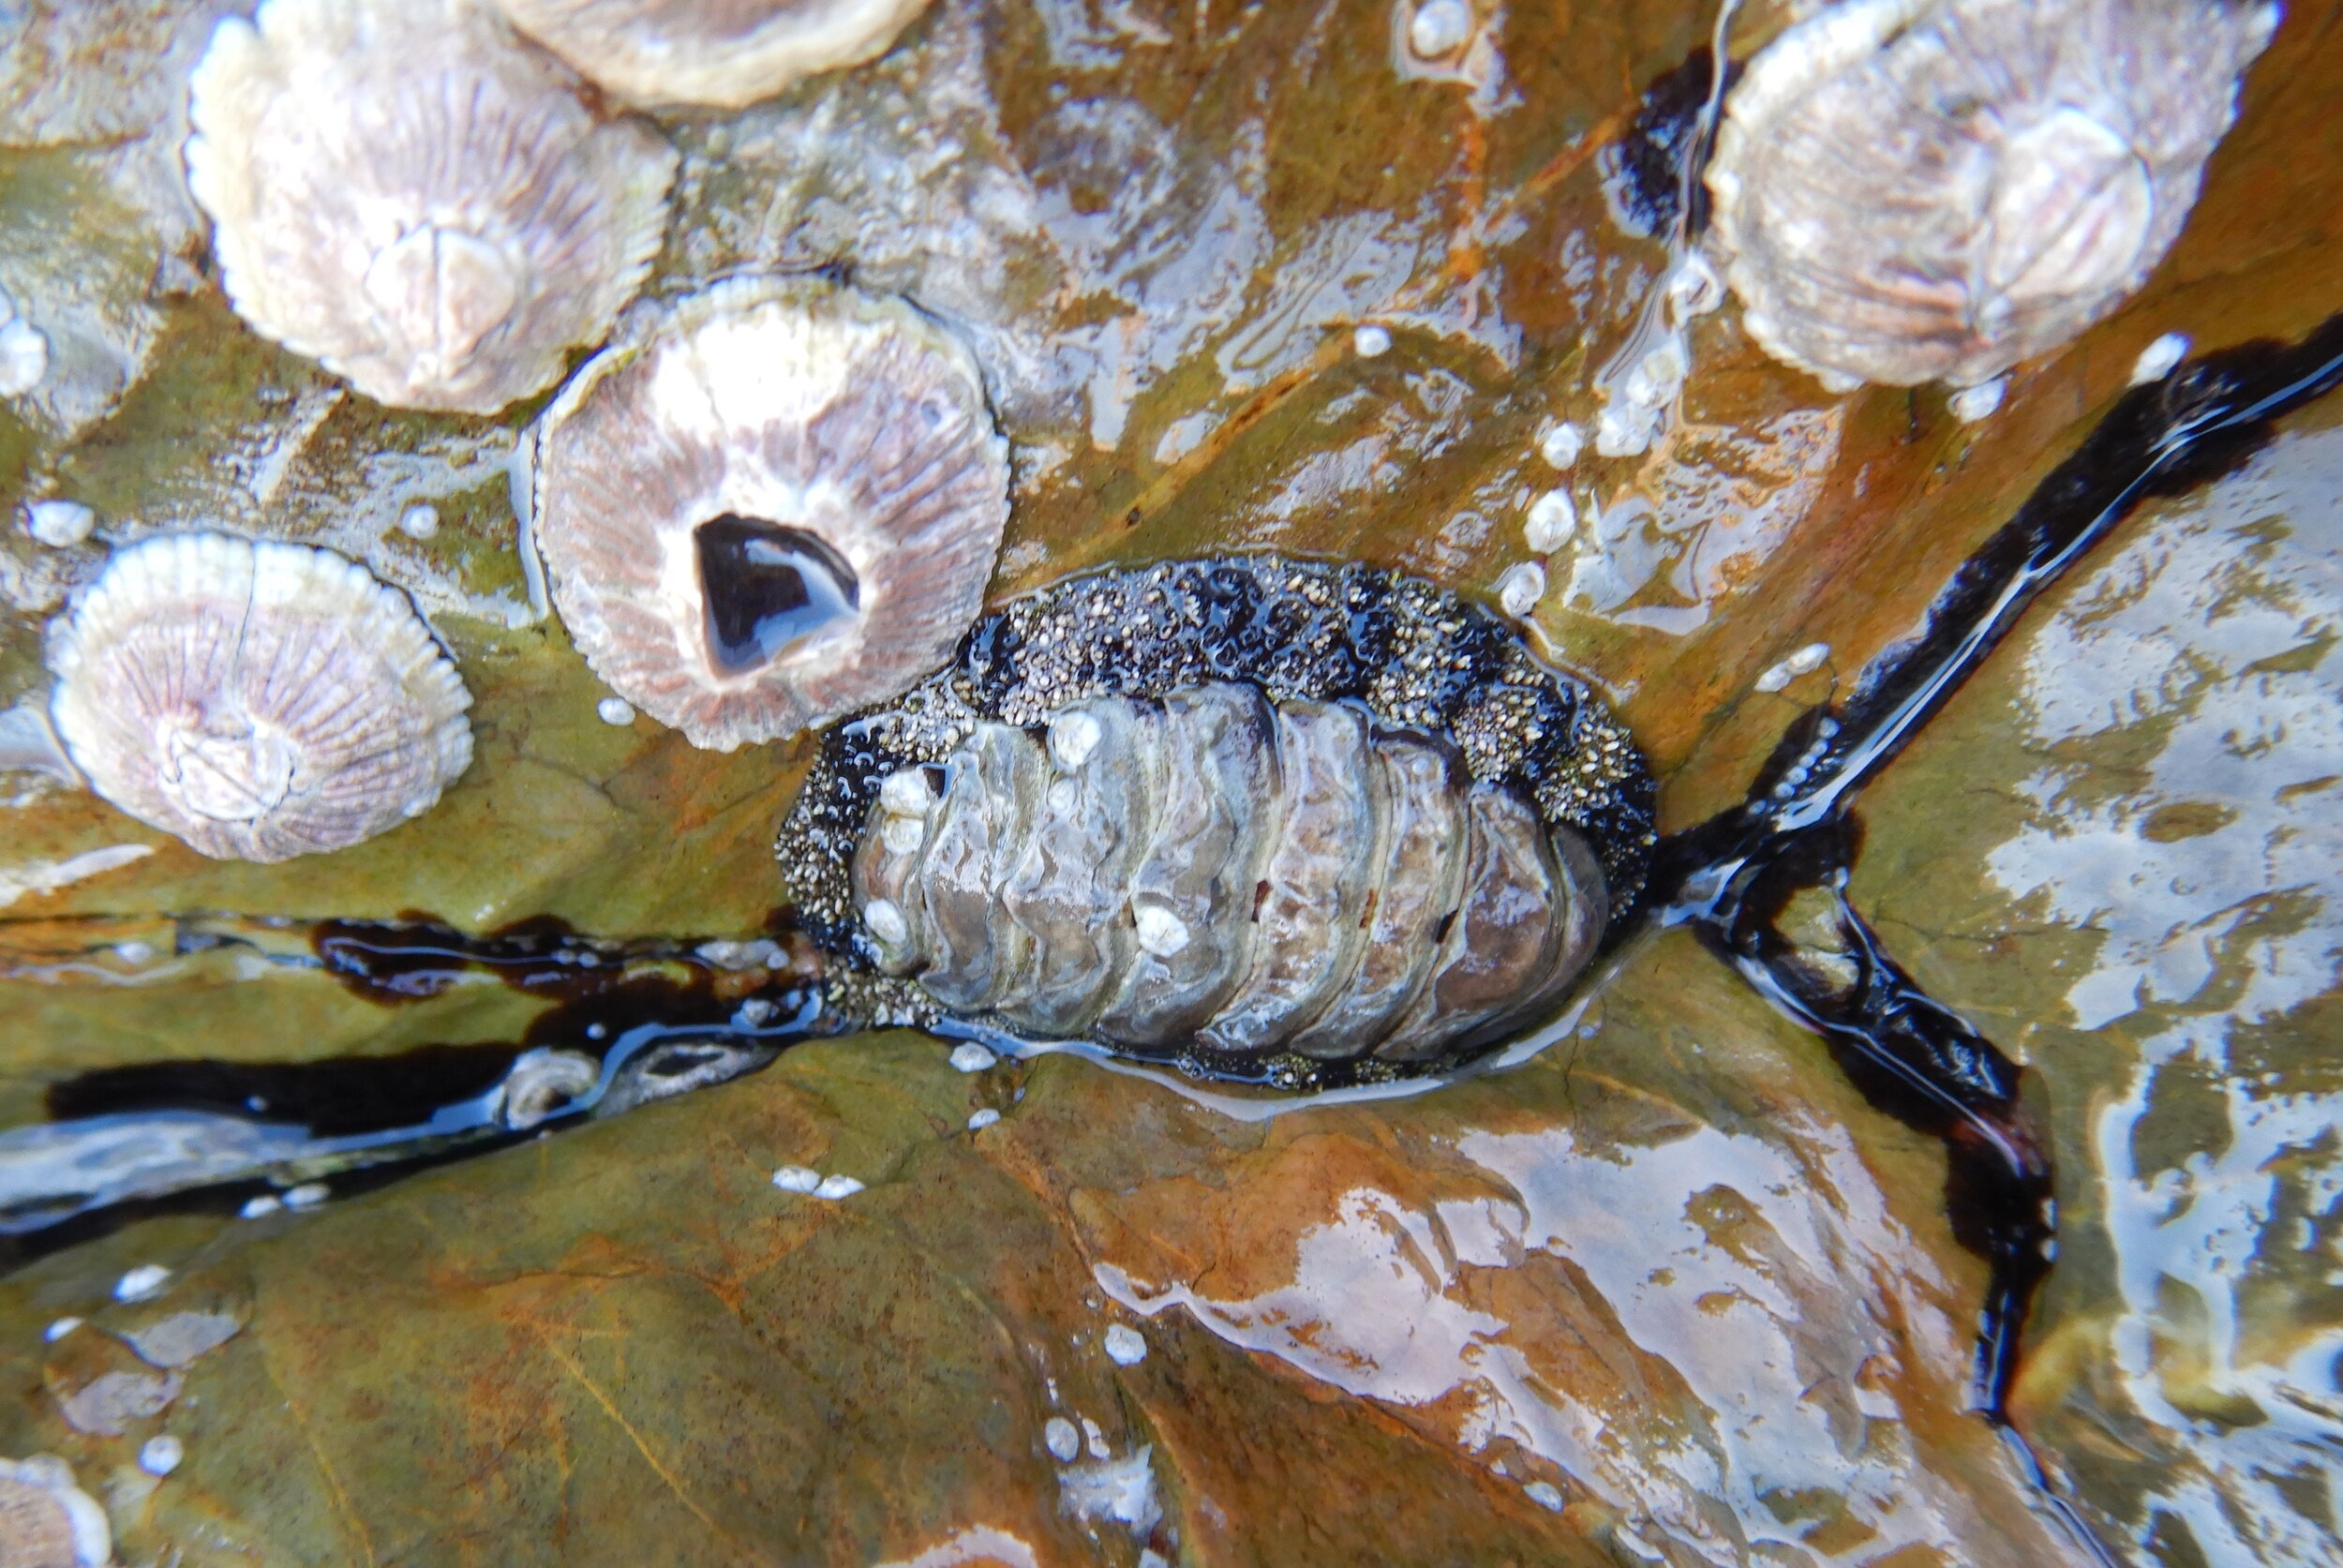  Barnacles, White Bluff rockpool. Have you seen our remarkable discovery about barnacles?? If not, visit the news page for a fun science read.  